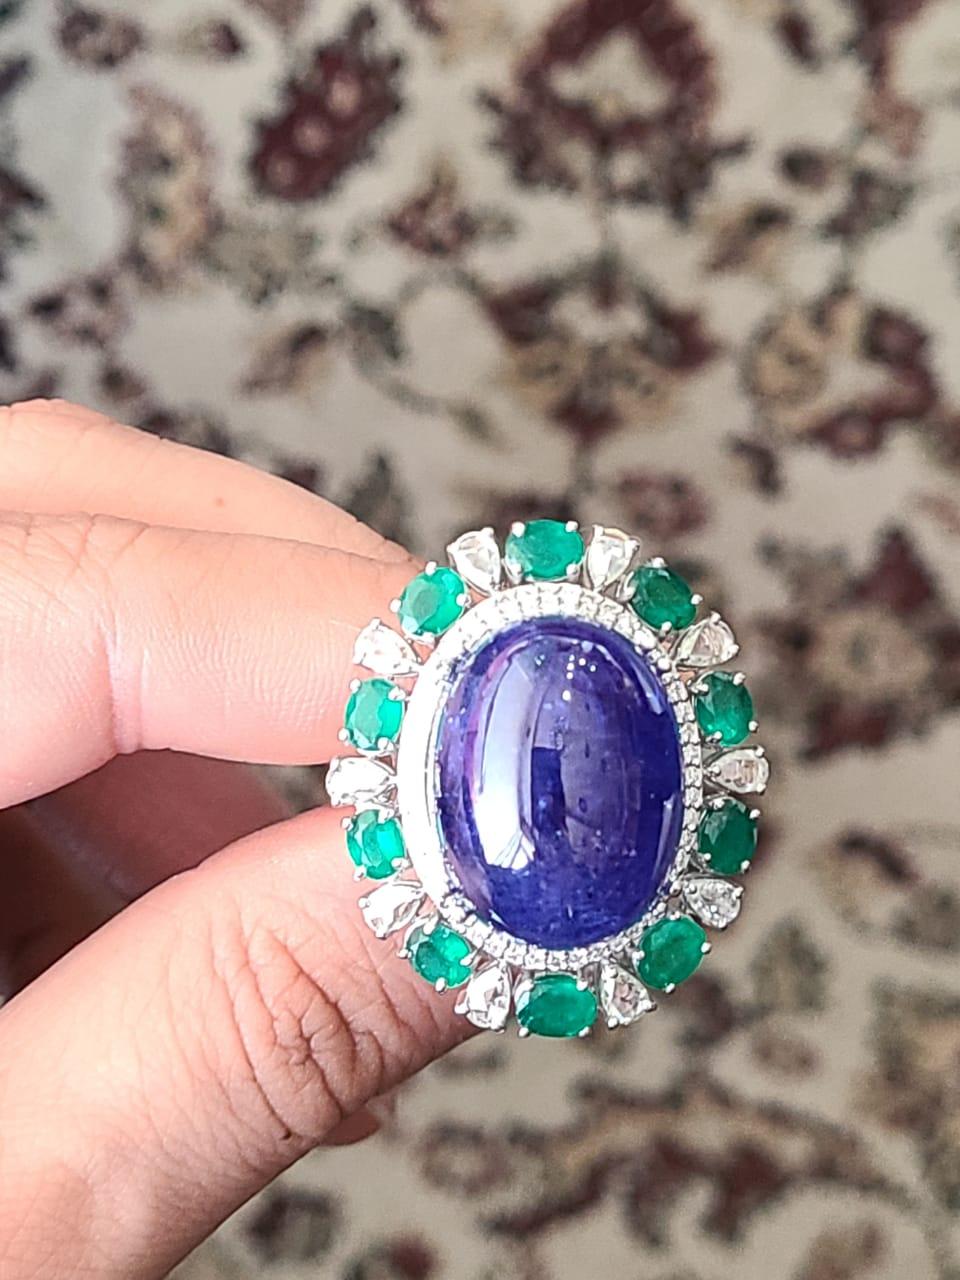 A very beautiful and one of a kind, Tanzanite & Emerald Cocktail/ Dome Ring set in 18K Gold & Diamonds. The weight of the Tanzanite cabochon is 42.70 carats. The Tanzanite is completely natural, without any treatment and is from Tanzania. The weight